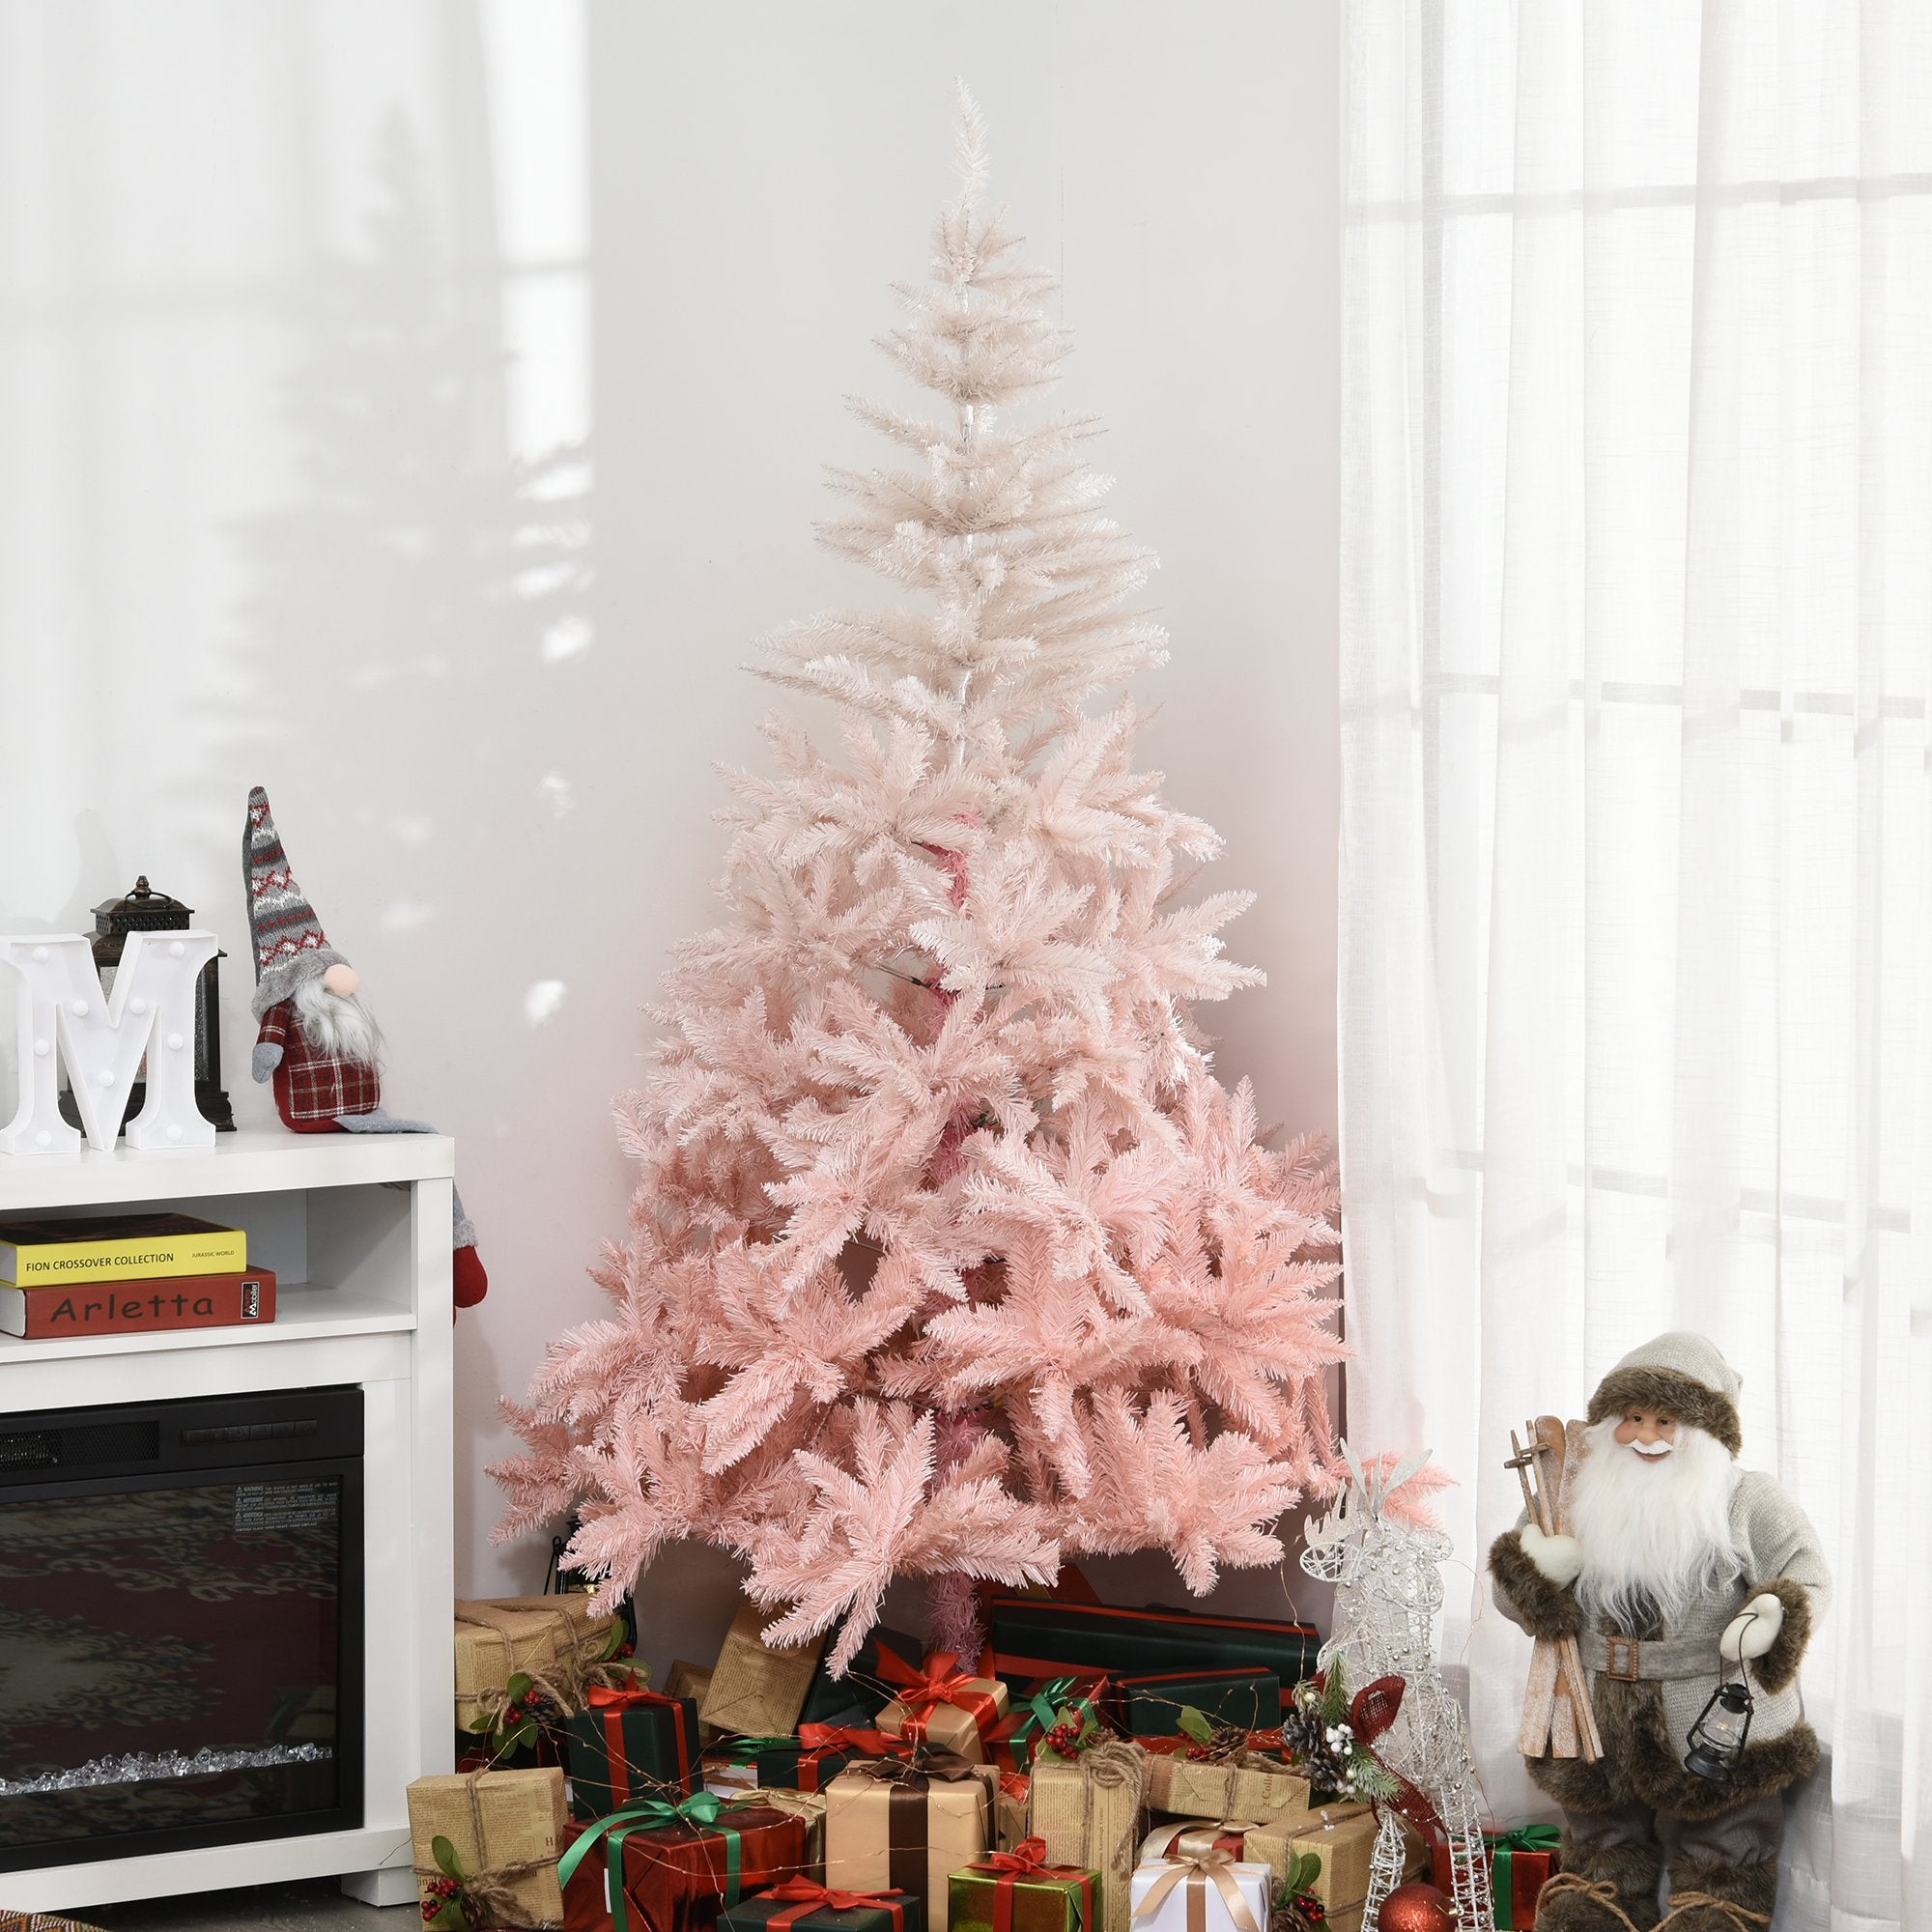 HOMCOM 6ft Christmas Decorations Realistic Design Faux Christmas Tree w/ Metal Stand and Quick Setup - Pink - Inspirely